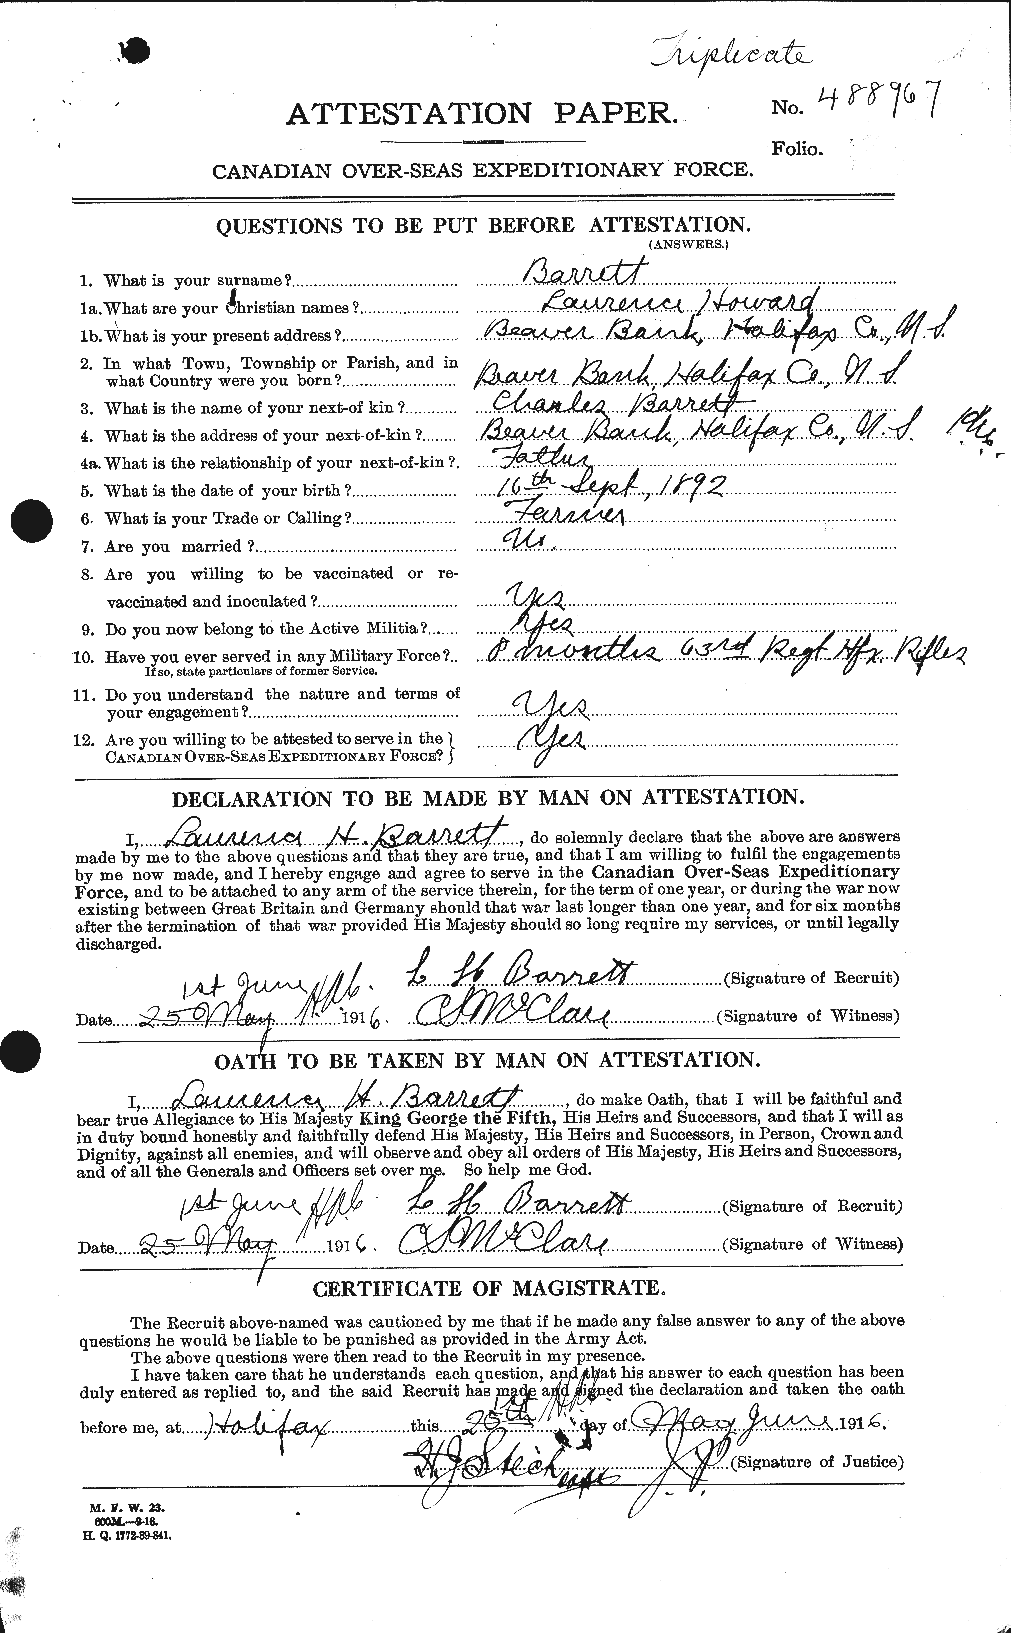 Personnel Records of the First World War - CEF 220227a